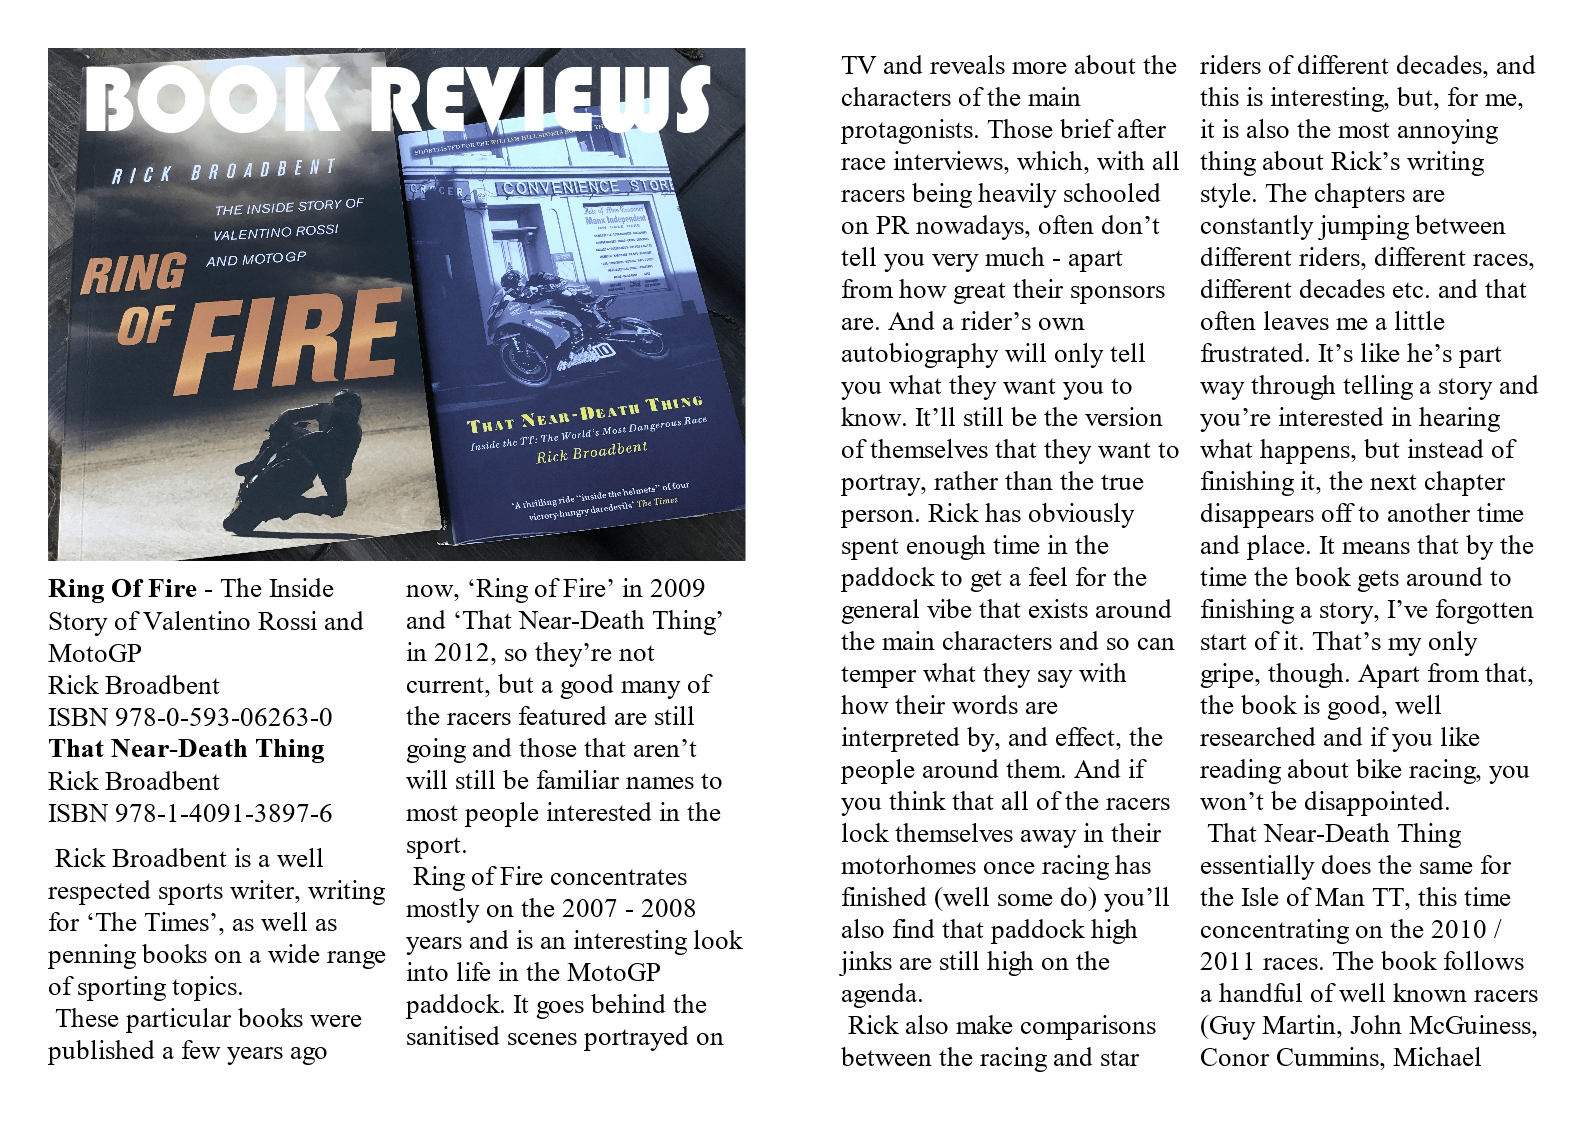 Book Reviews - Ring Of Fire - That Near-Death Thing